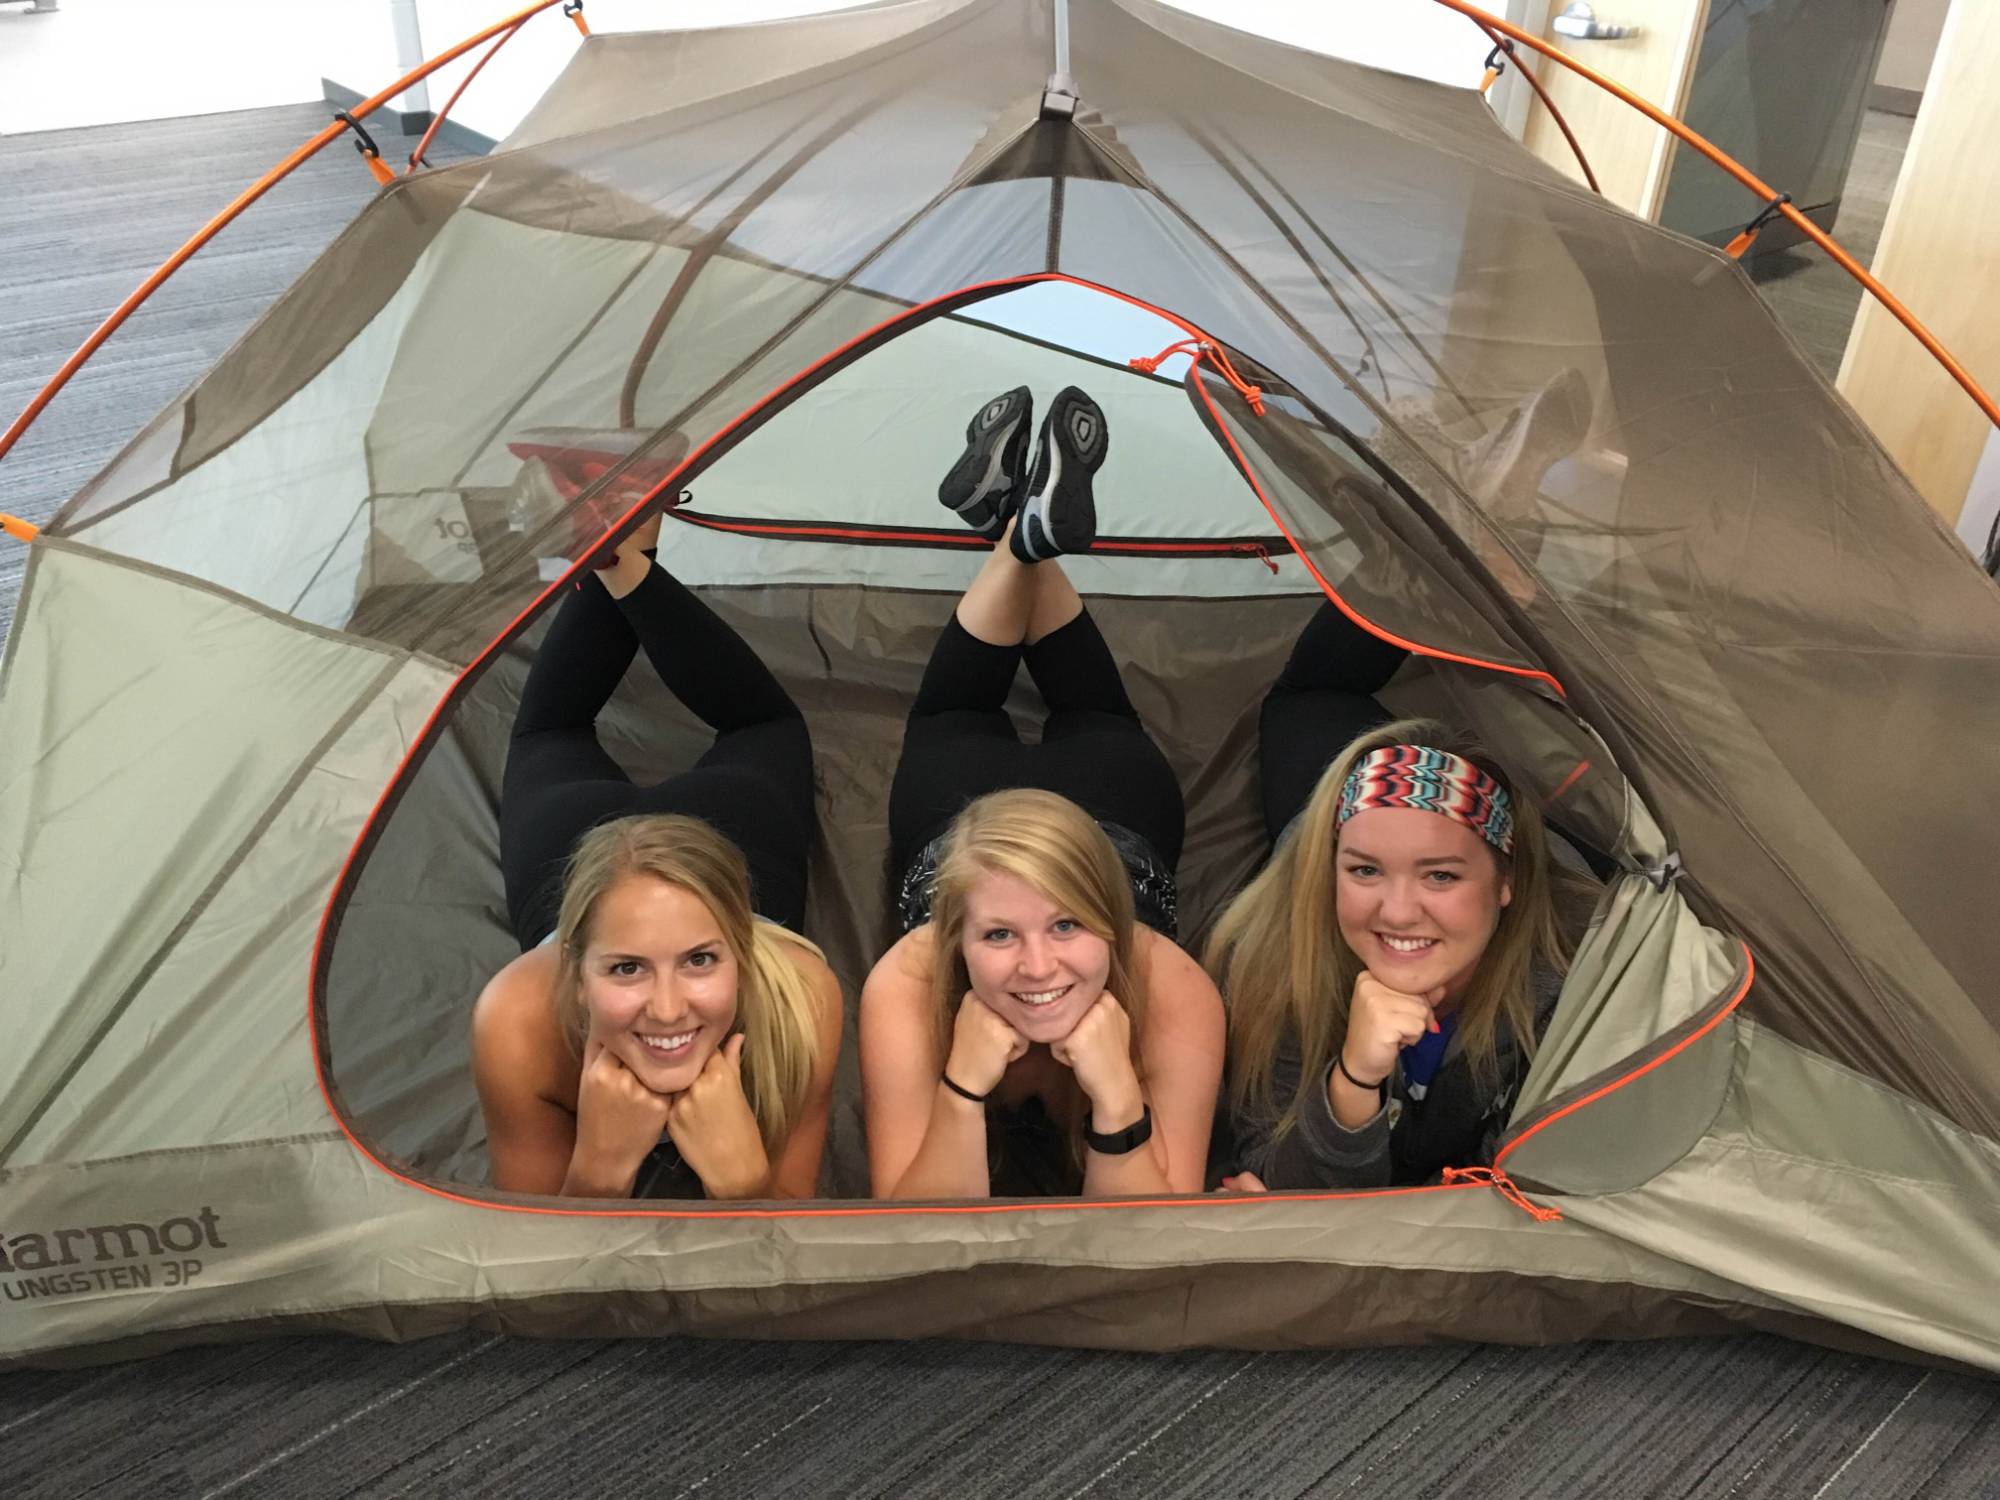 Students smiling in a tent